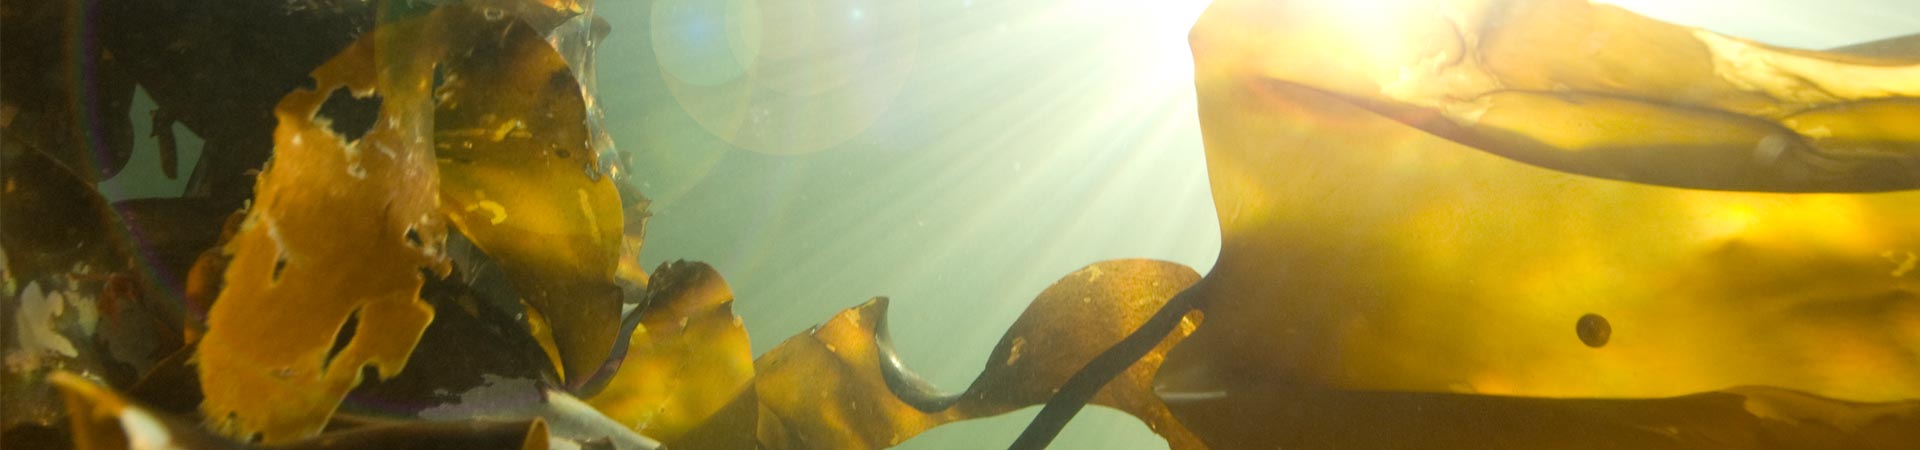 Underwater image showing seaweed fronts waving in current near water surface